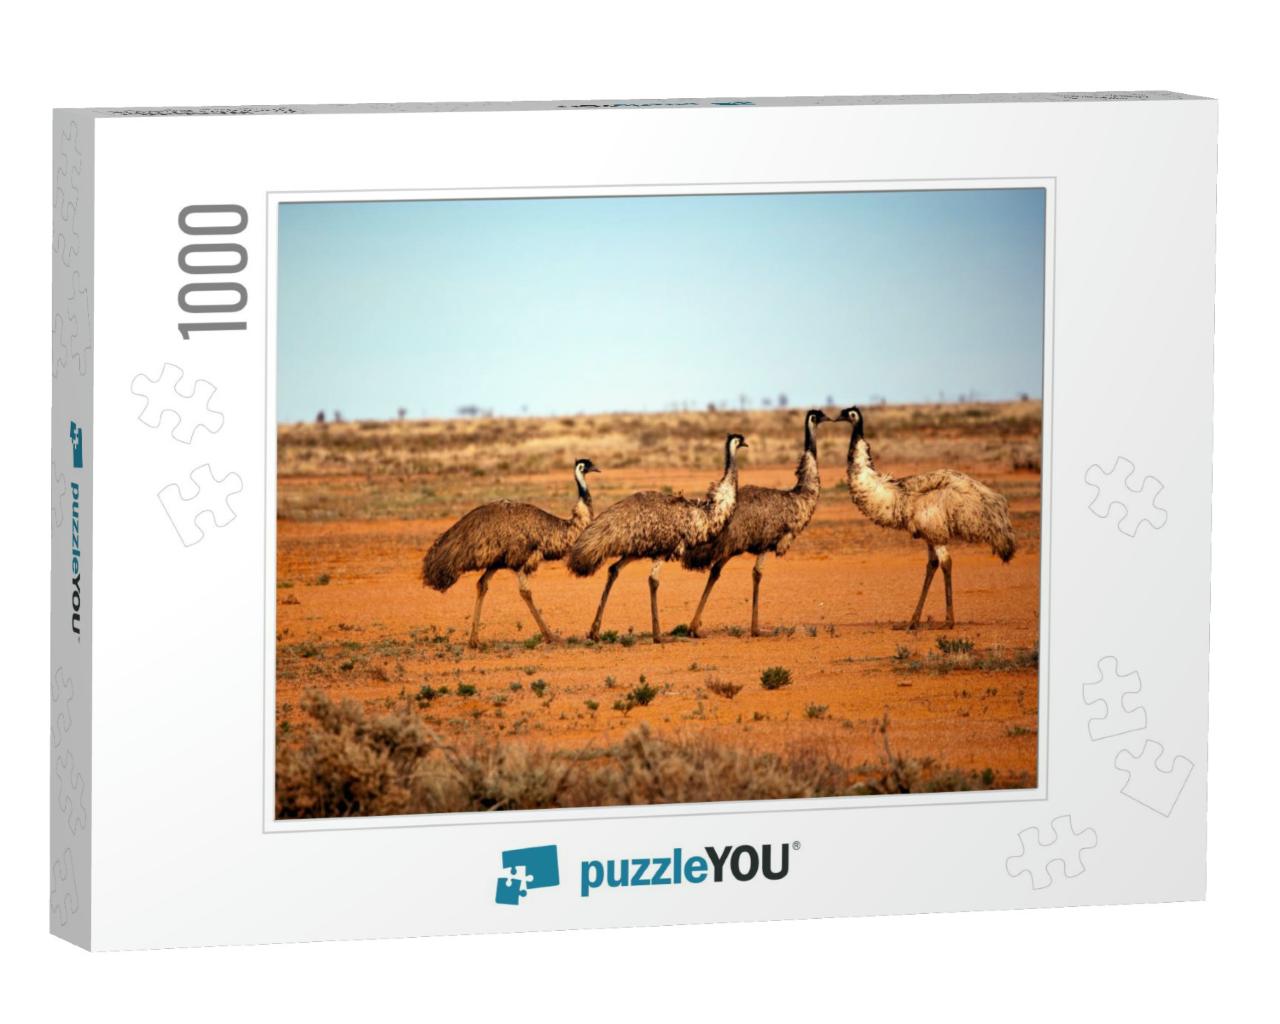 Emus in the Wild, Outback New South Wales, Australia... Jigsaw Puzzle with 1000 pieces